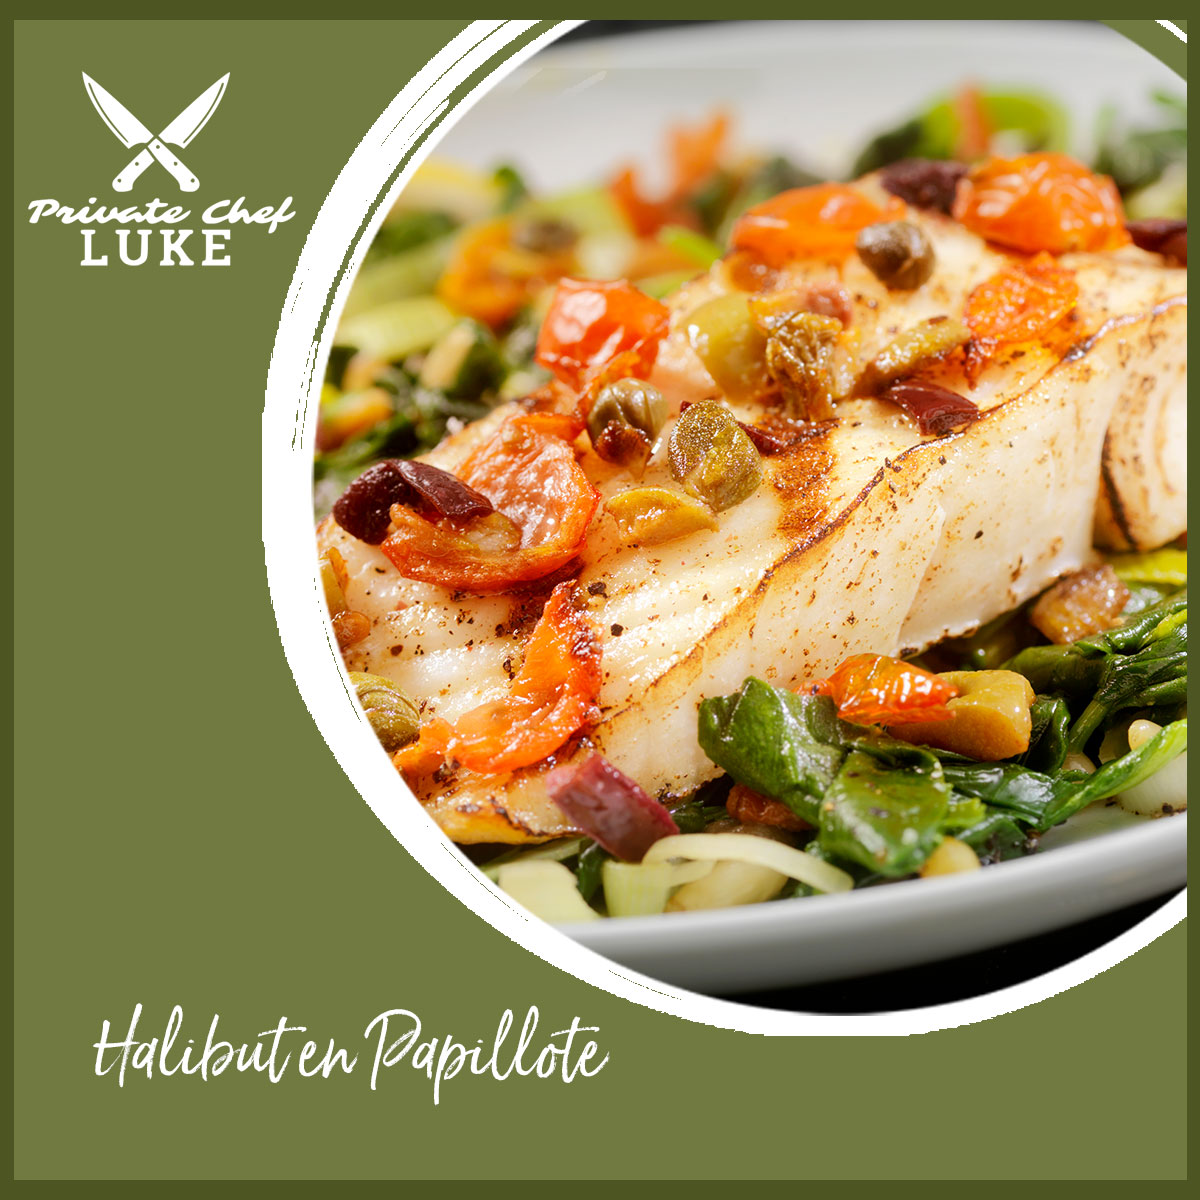 Click the image to view and download Chef Luke's recipe for Halibut en Papillote